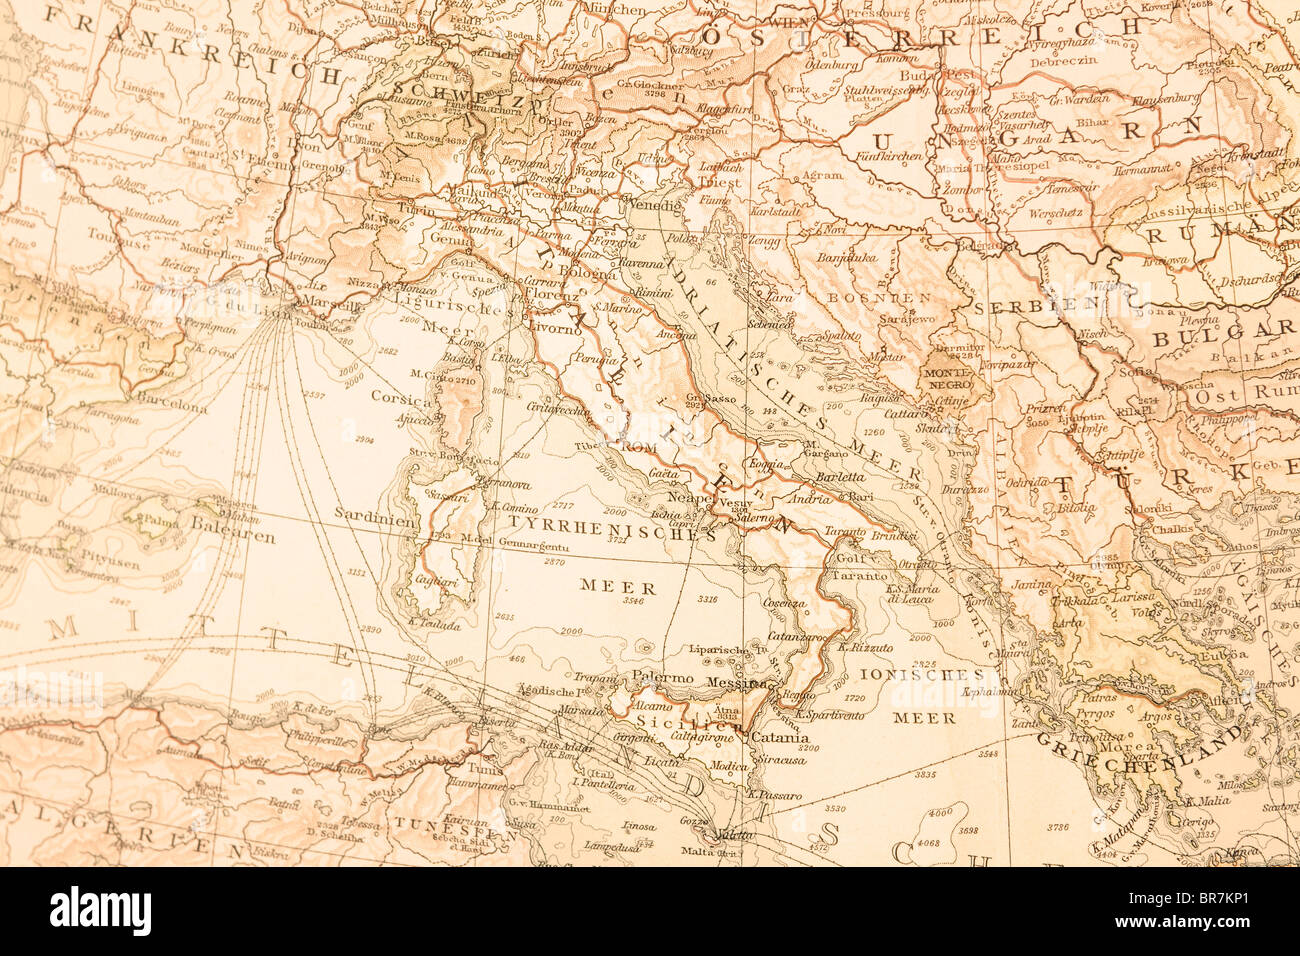 Old map of Italy,1895. Stock Photo